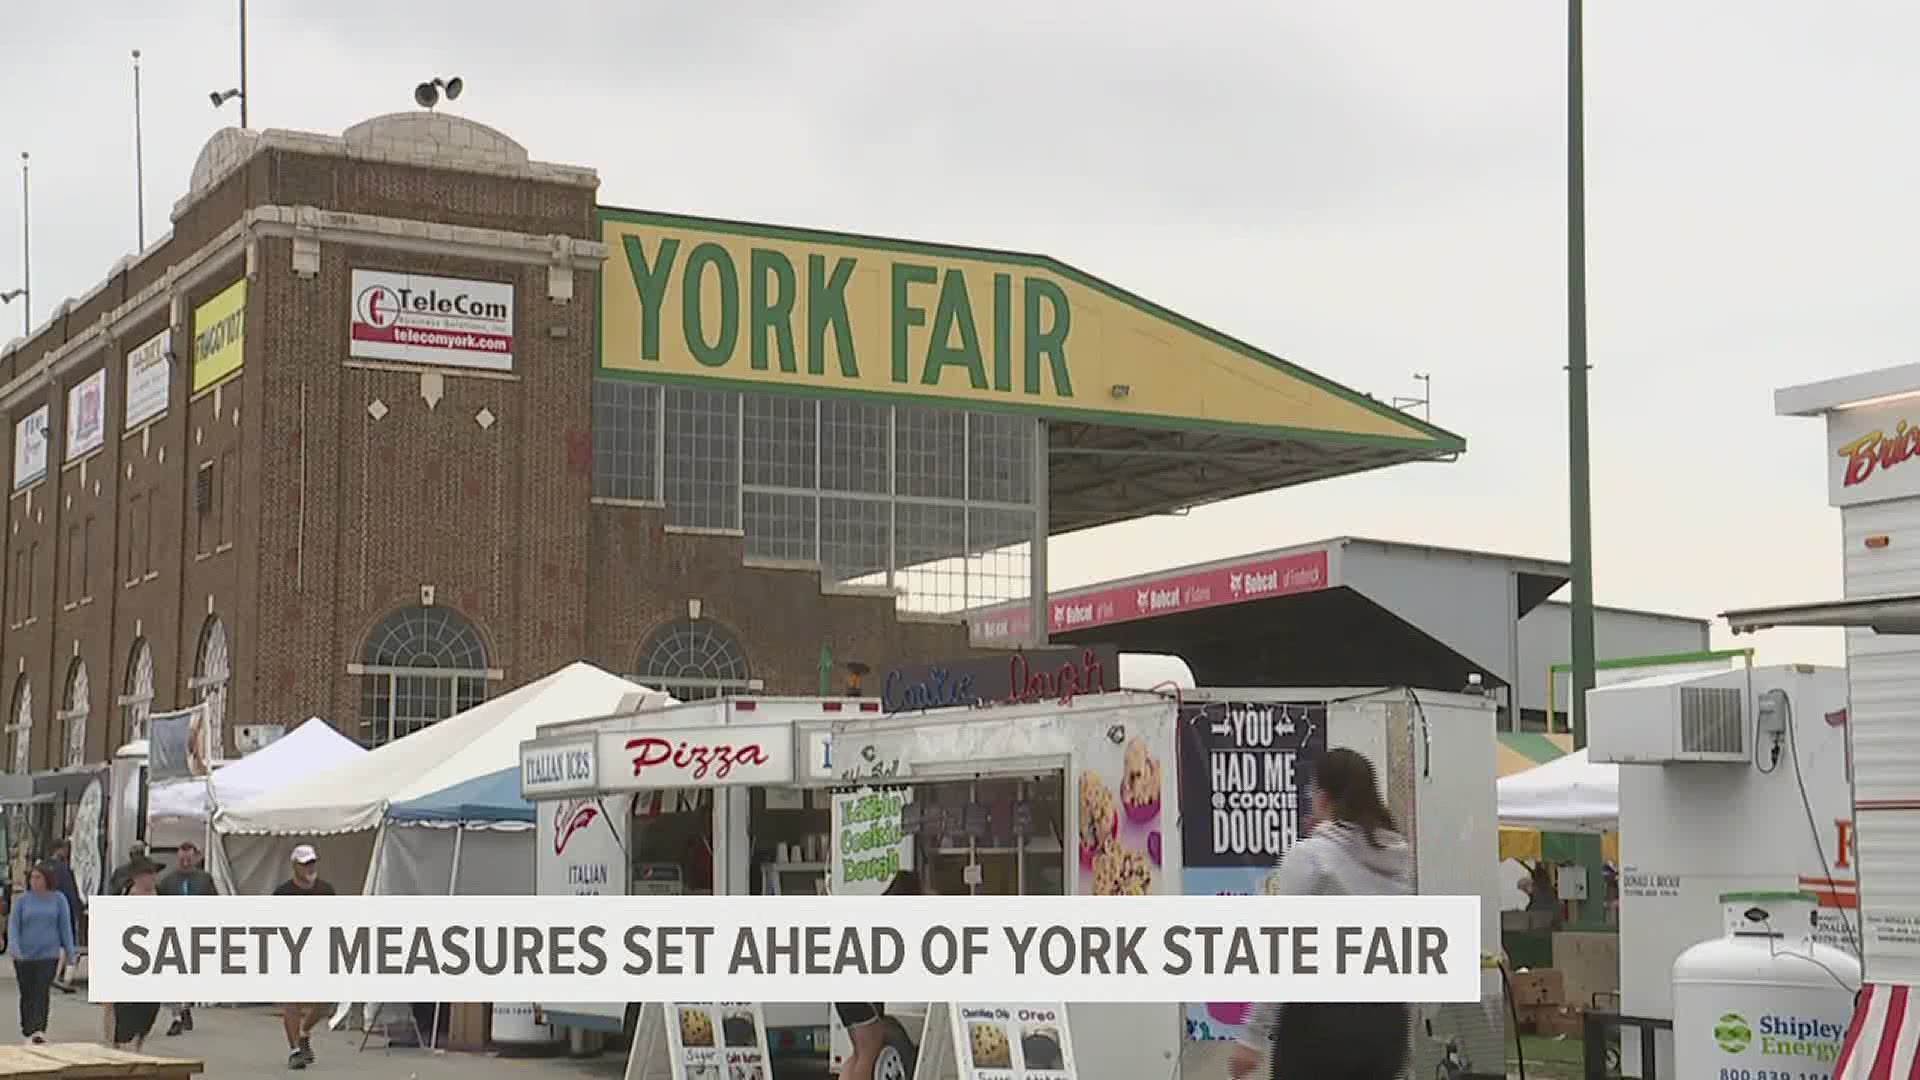 The York State Fair will open to the public tomorrow and event managers are adding the finishing touches to your favorite rides and activities.